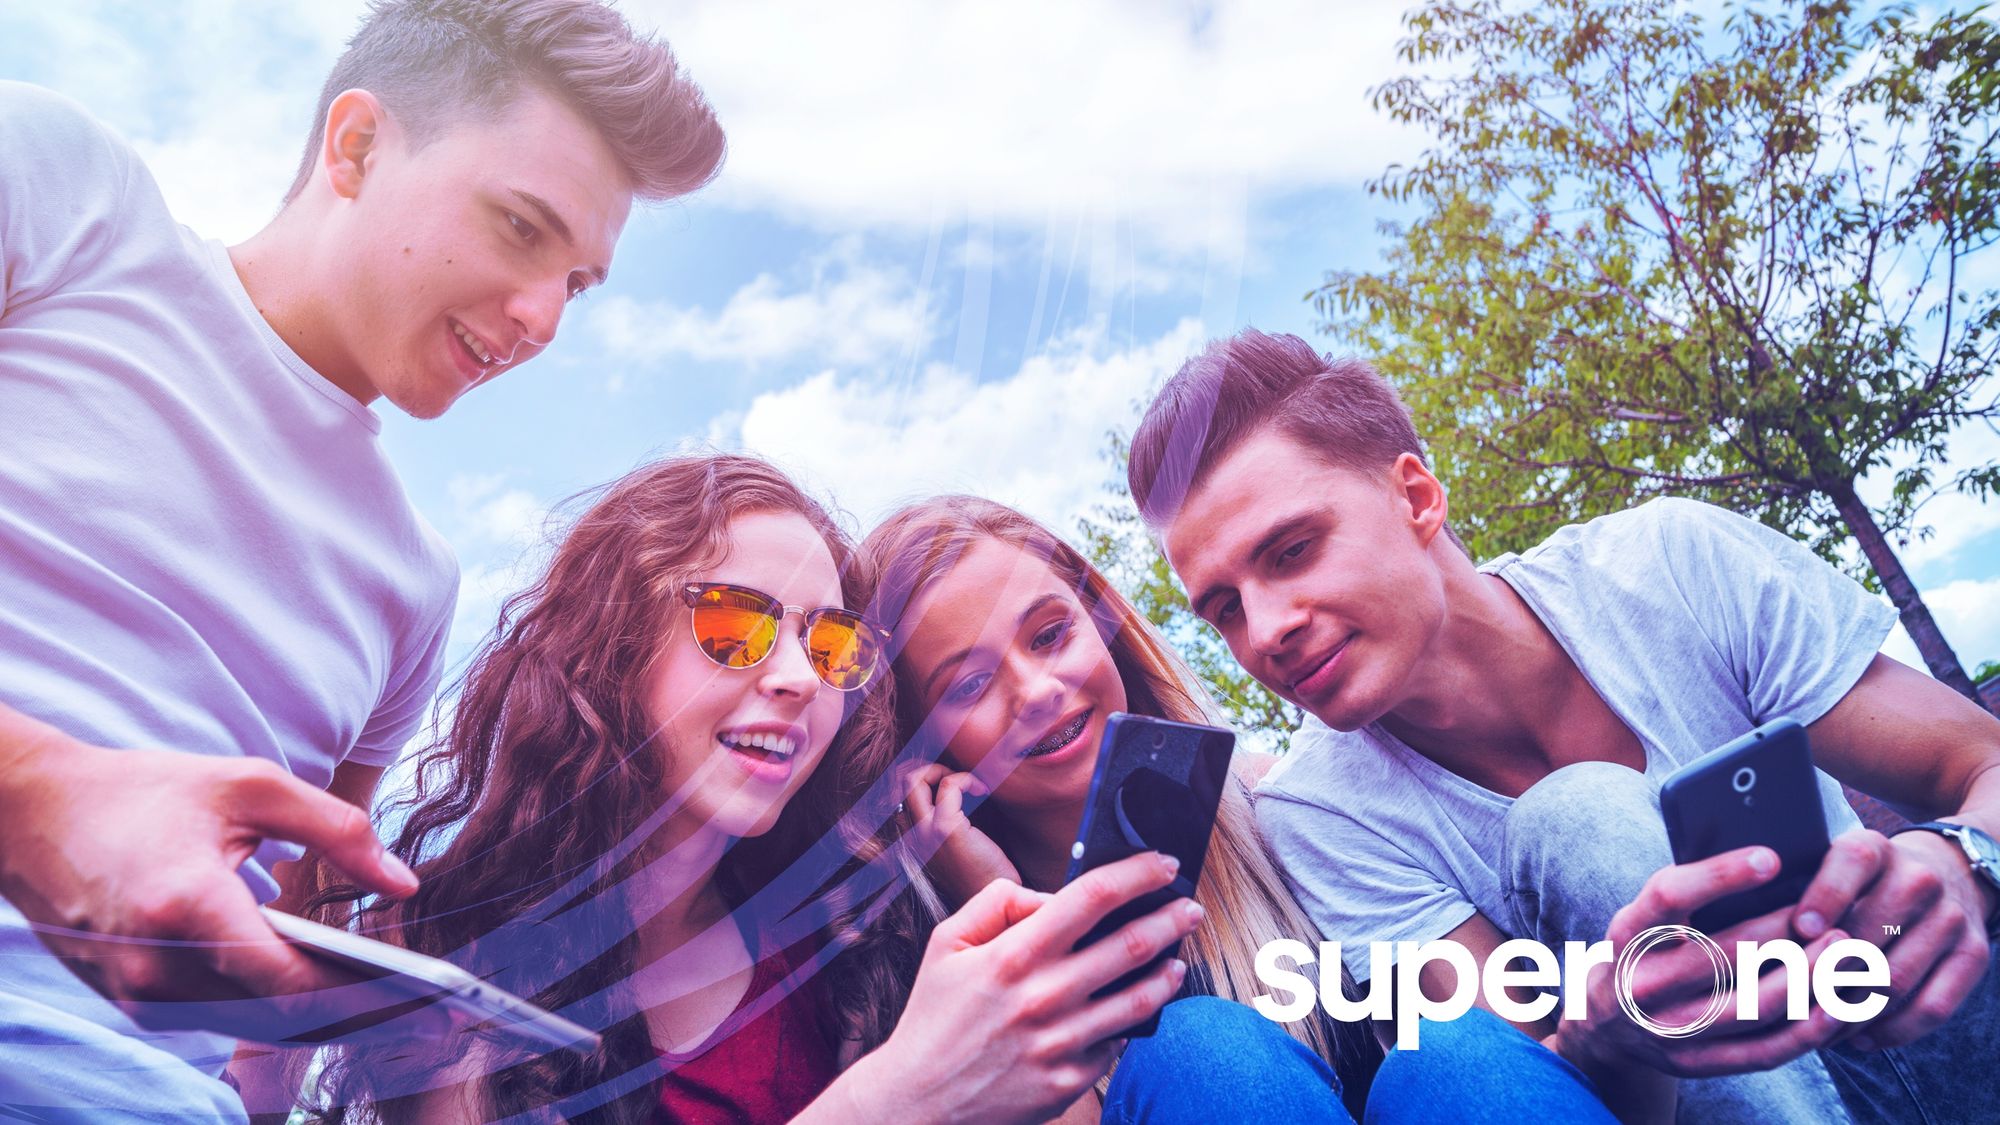 Cracking the trivia gaming market: SuperOne can be no. 1 in a sector ripe for an ambitious player!